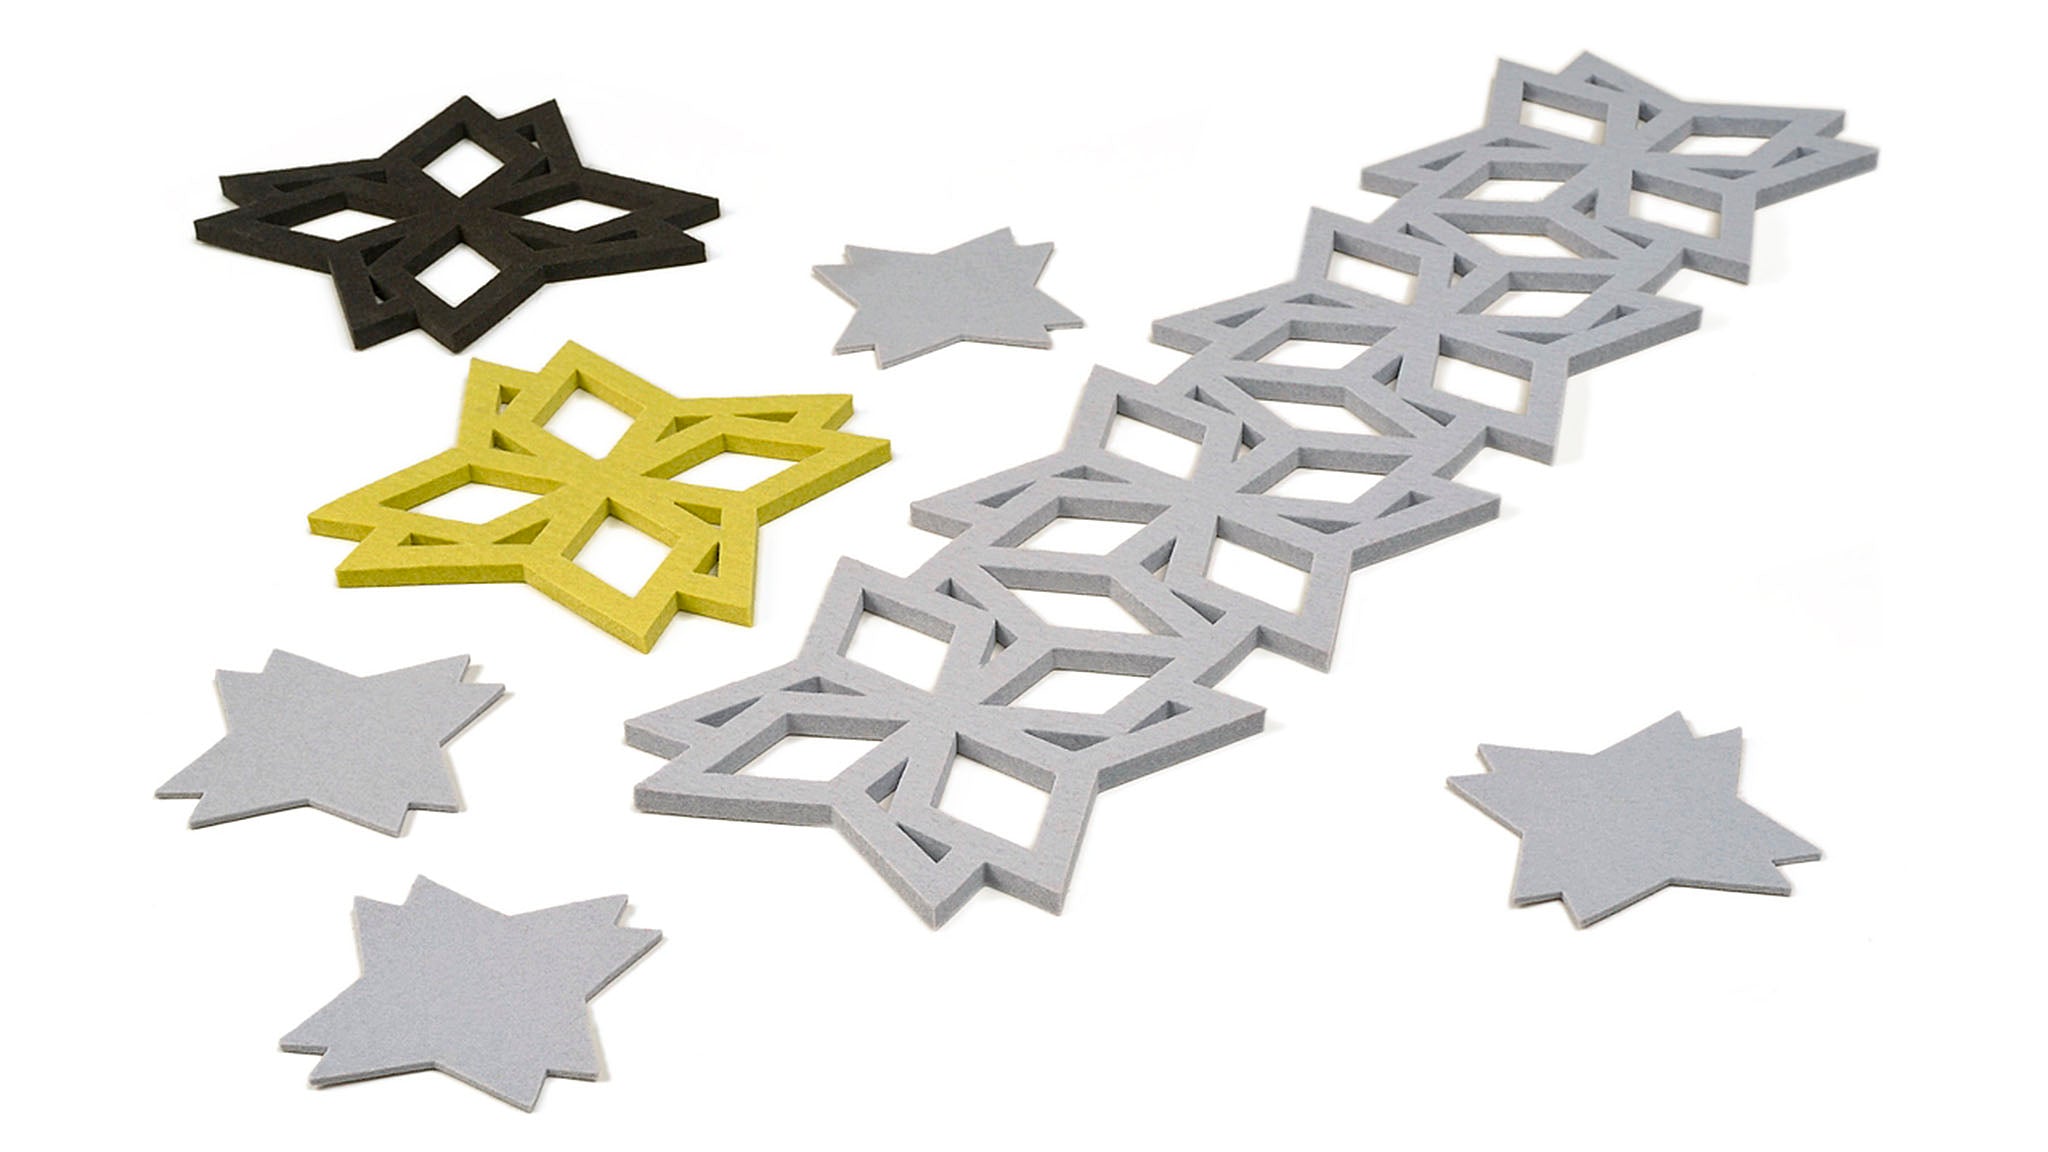 New York Magazine, 2010 Not-So-Last-Minute Gift Guide: Kide coasters by Verso Design.